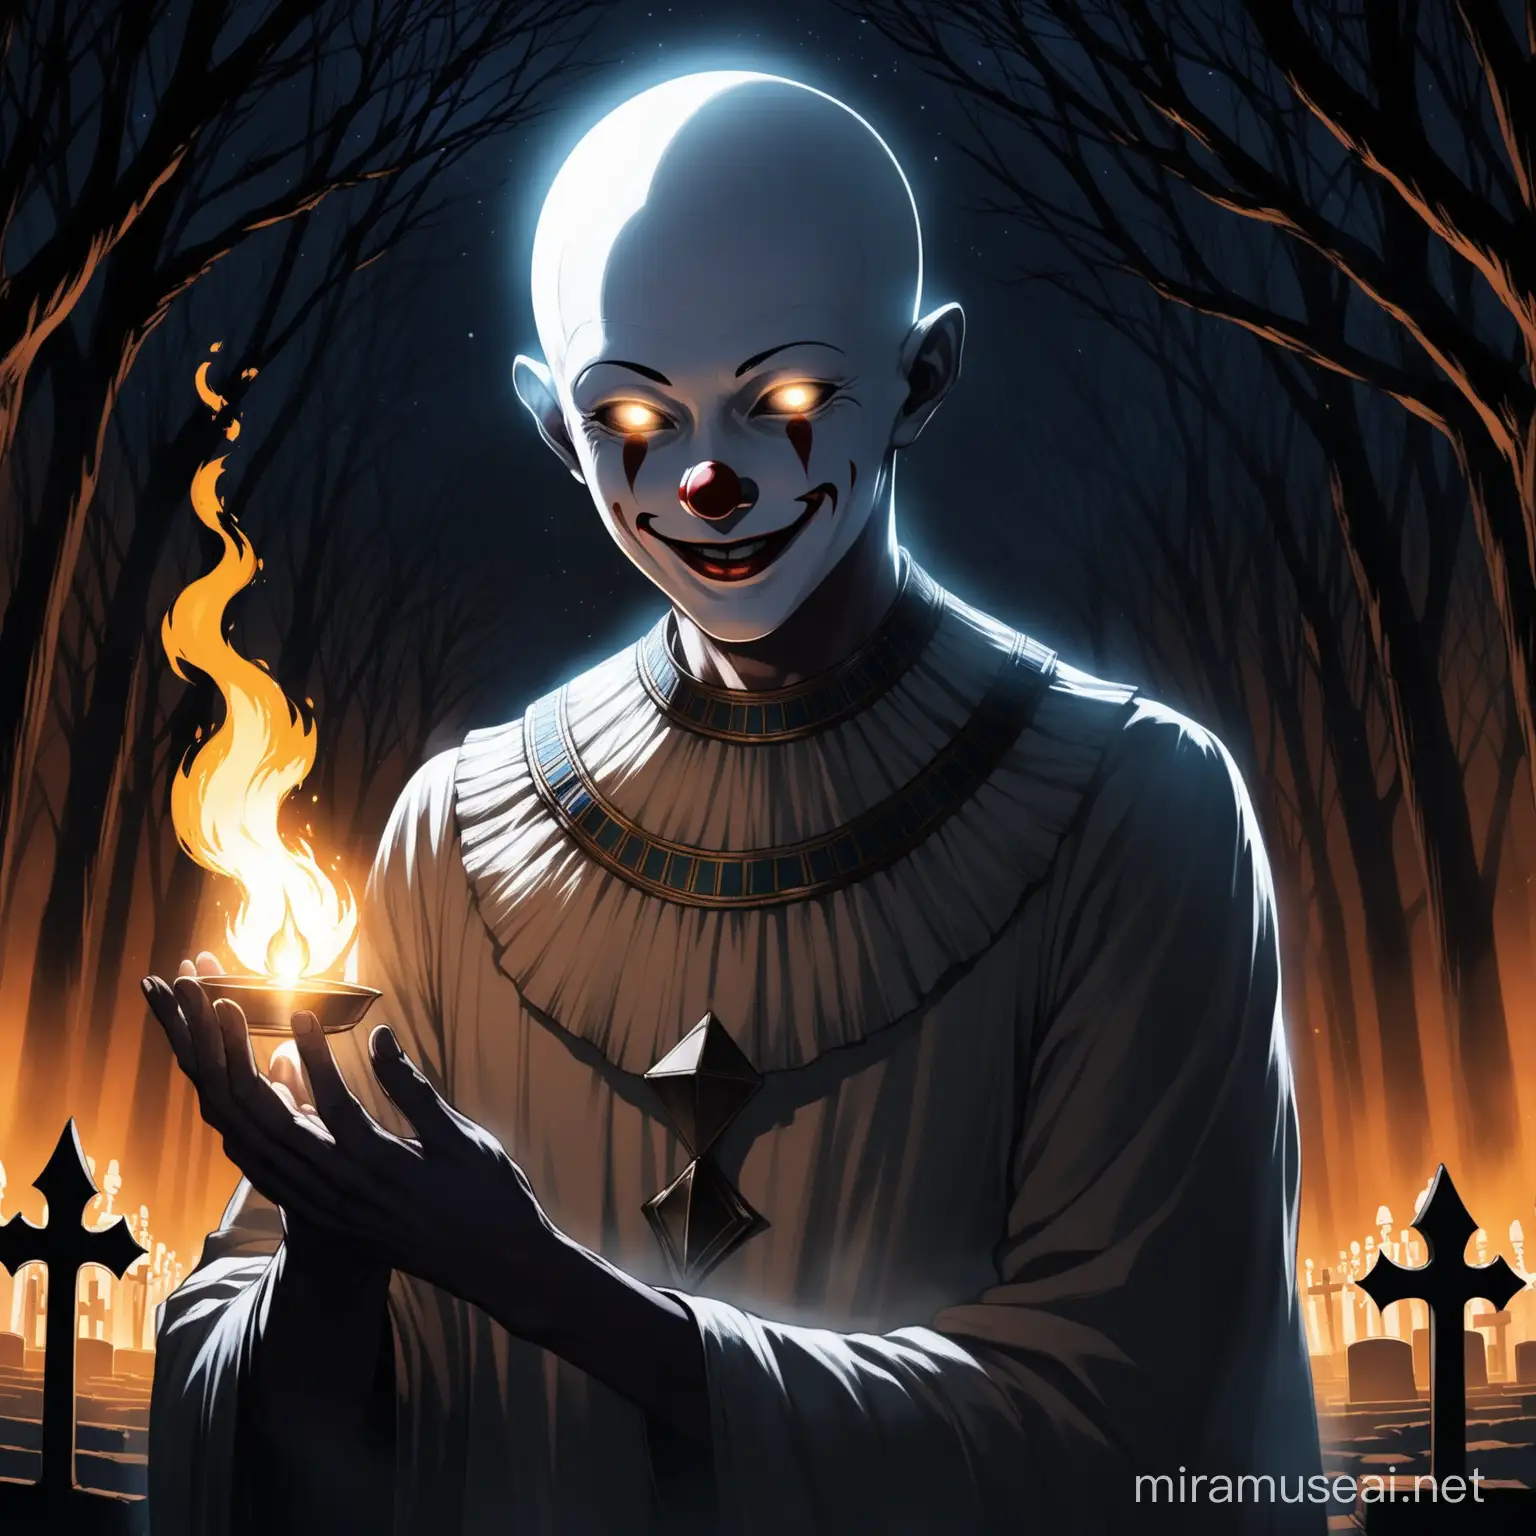 Smiling Albino Male Clown Holding Silver FireAnkh in Nighttime Egyptian Cemetery